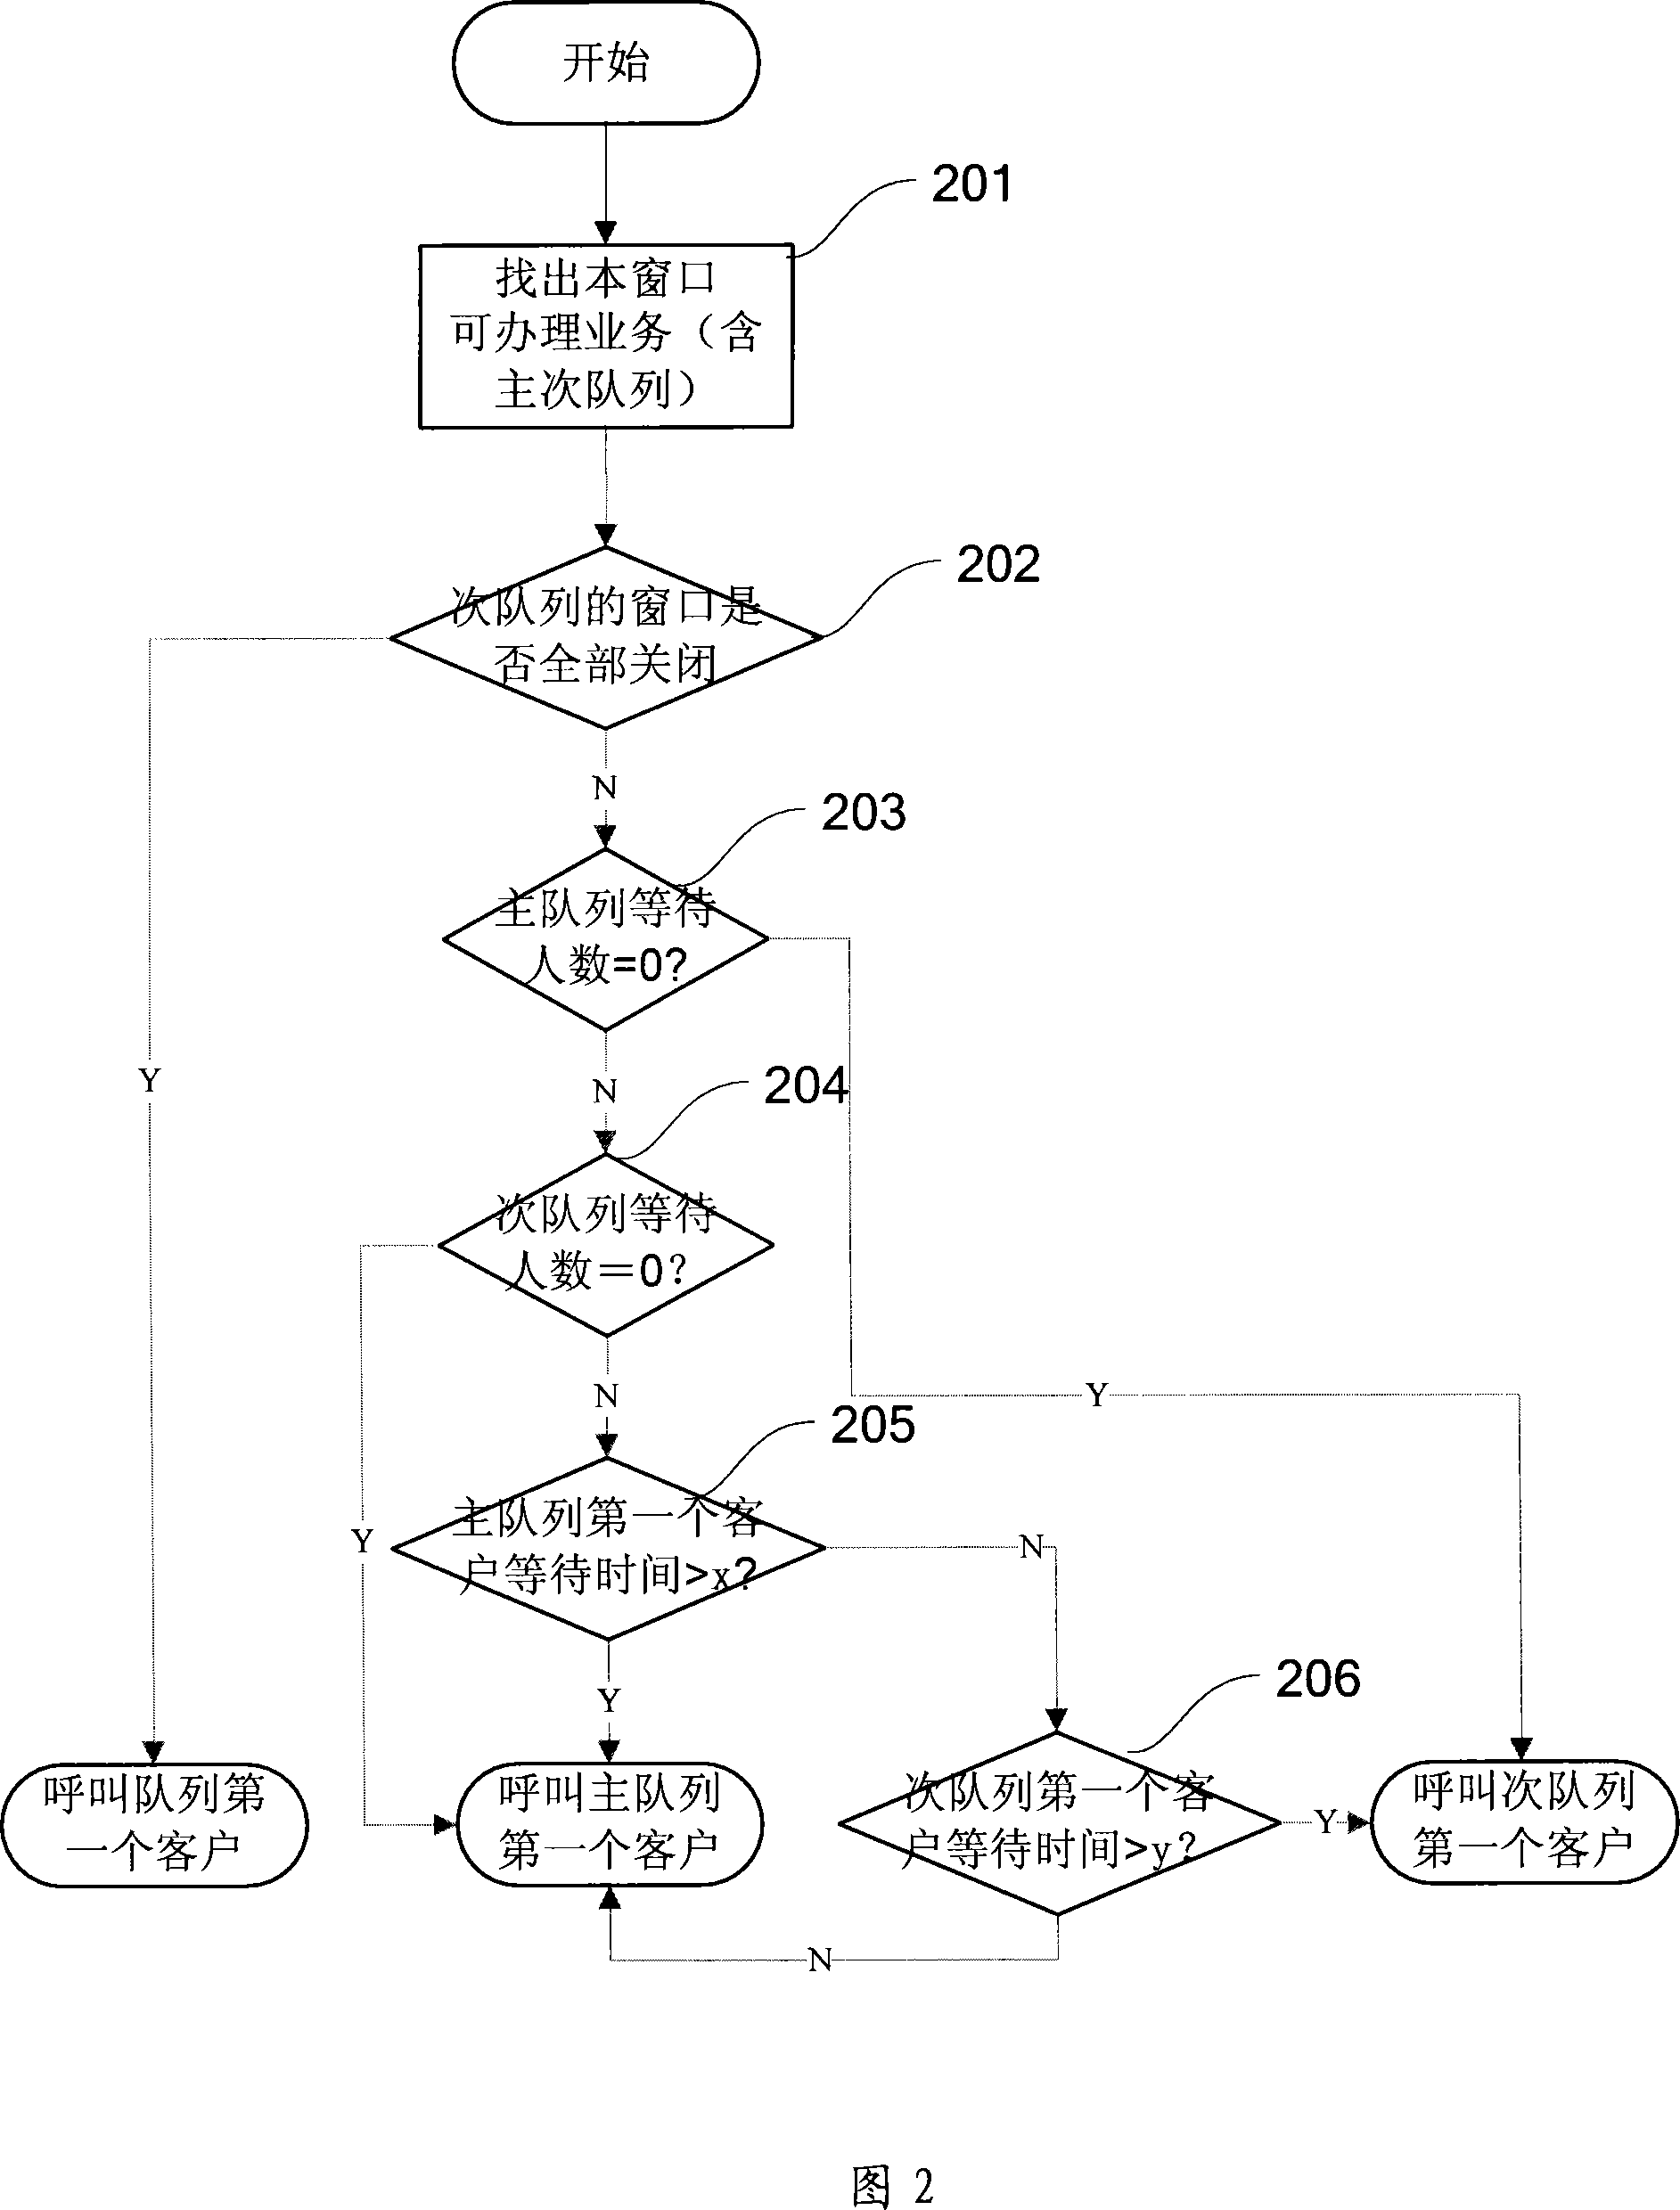 Process for optimizing ordering processing for multiple affairs